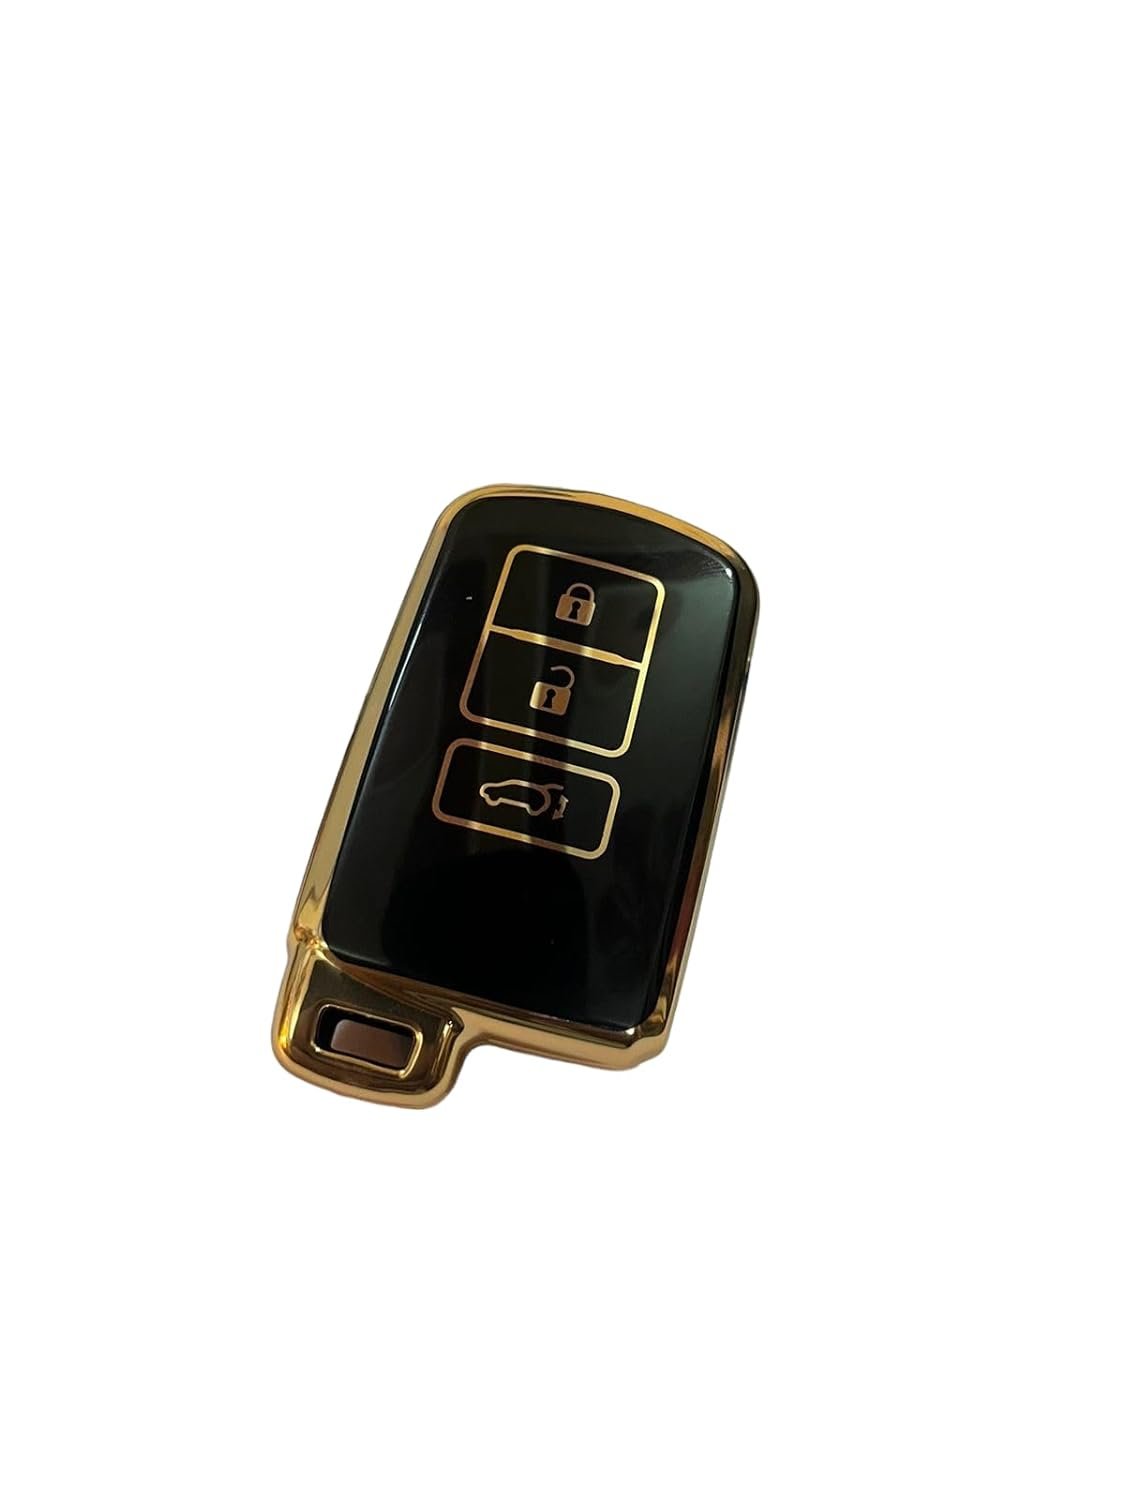 TPU Car Key Cover Compatible with Corolla Altis Smart Key (Gold/Black) Image 